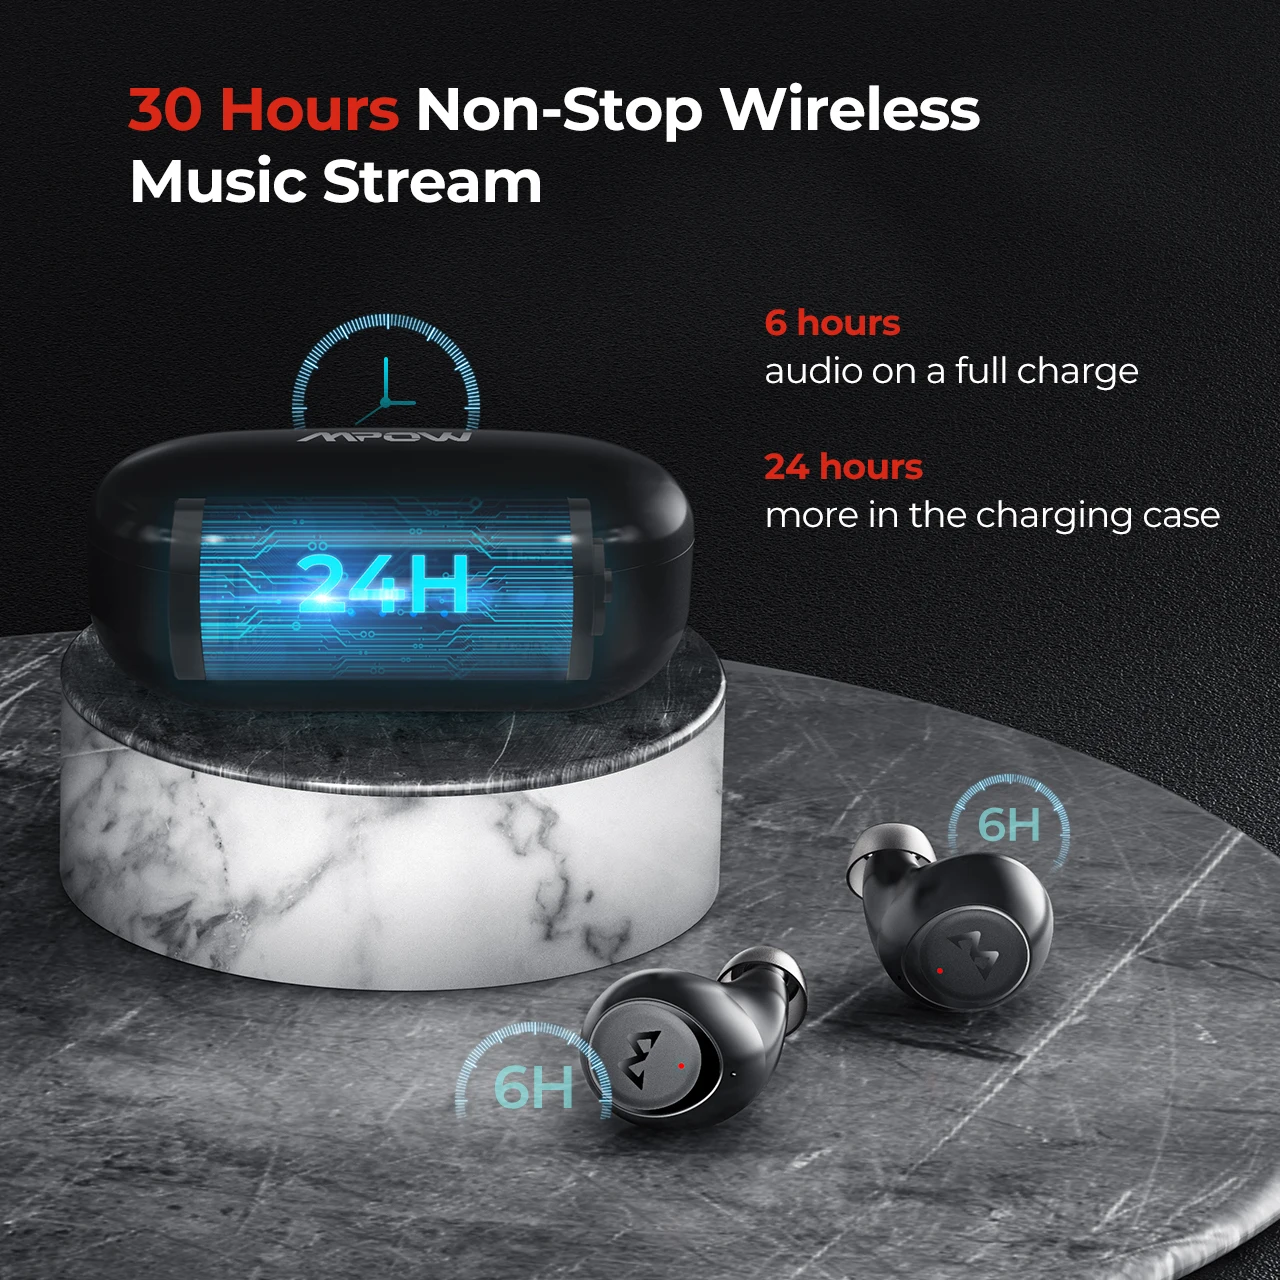 Mpow m7 tws wireless earphones ipx7 waterproof bluetooth 5.0 30h playing time usb-c charging for iphone 11 xs x samsung xiaomi 9